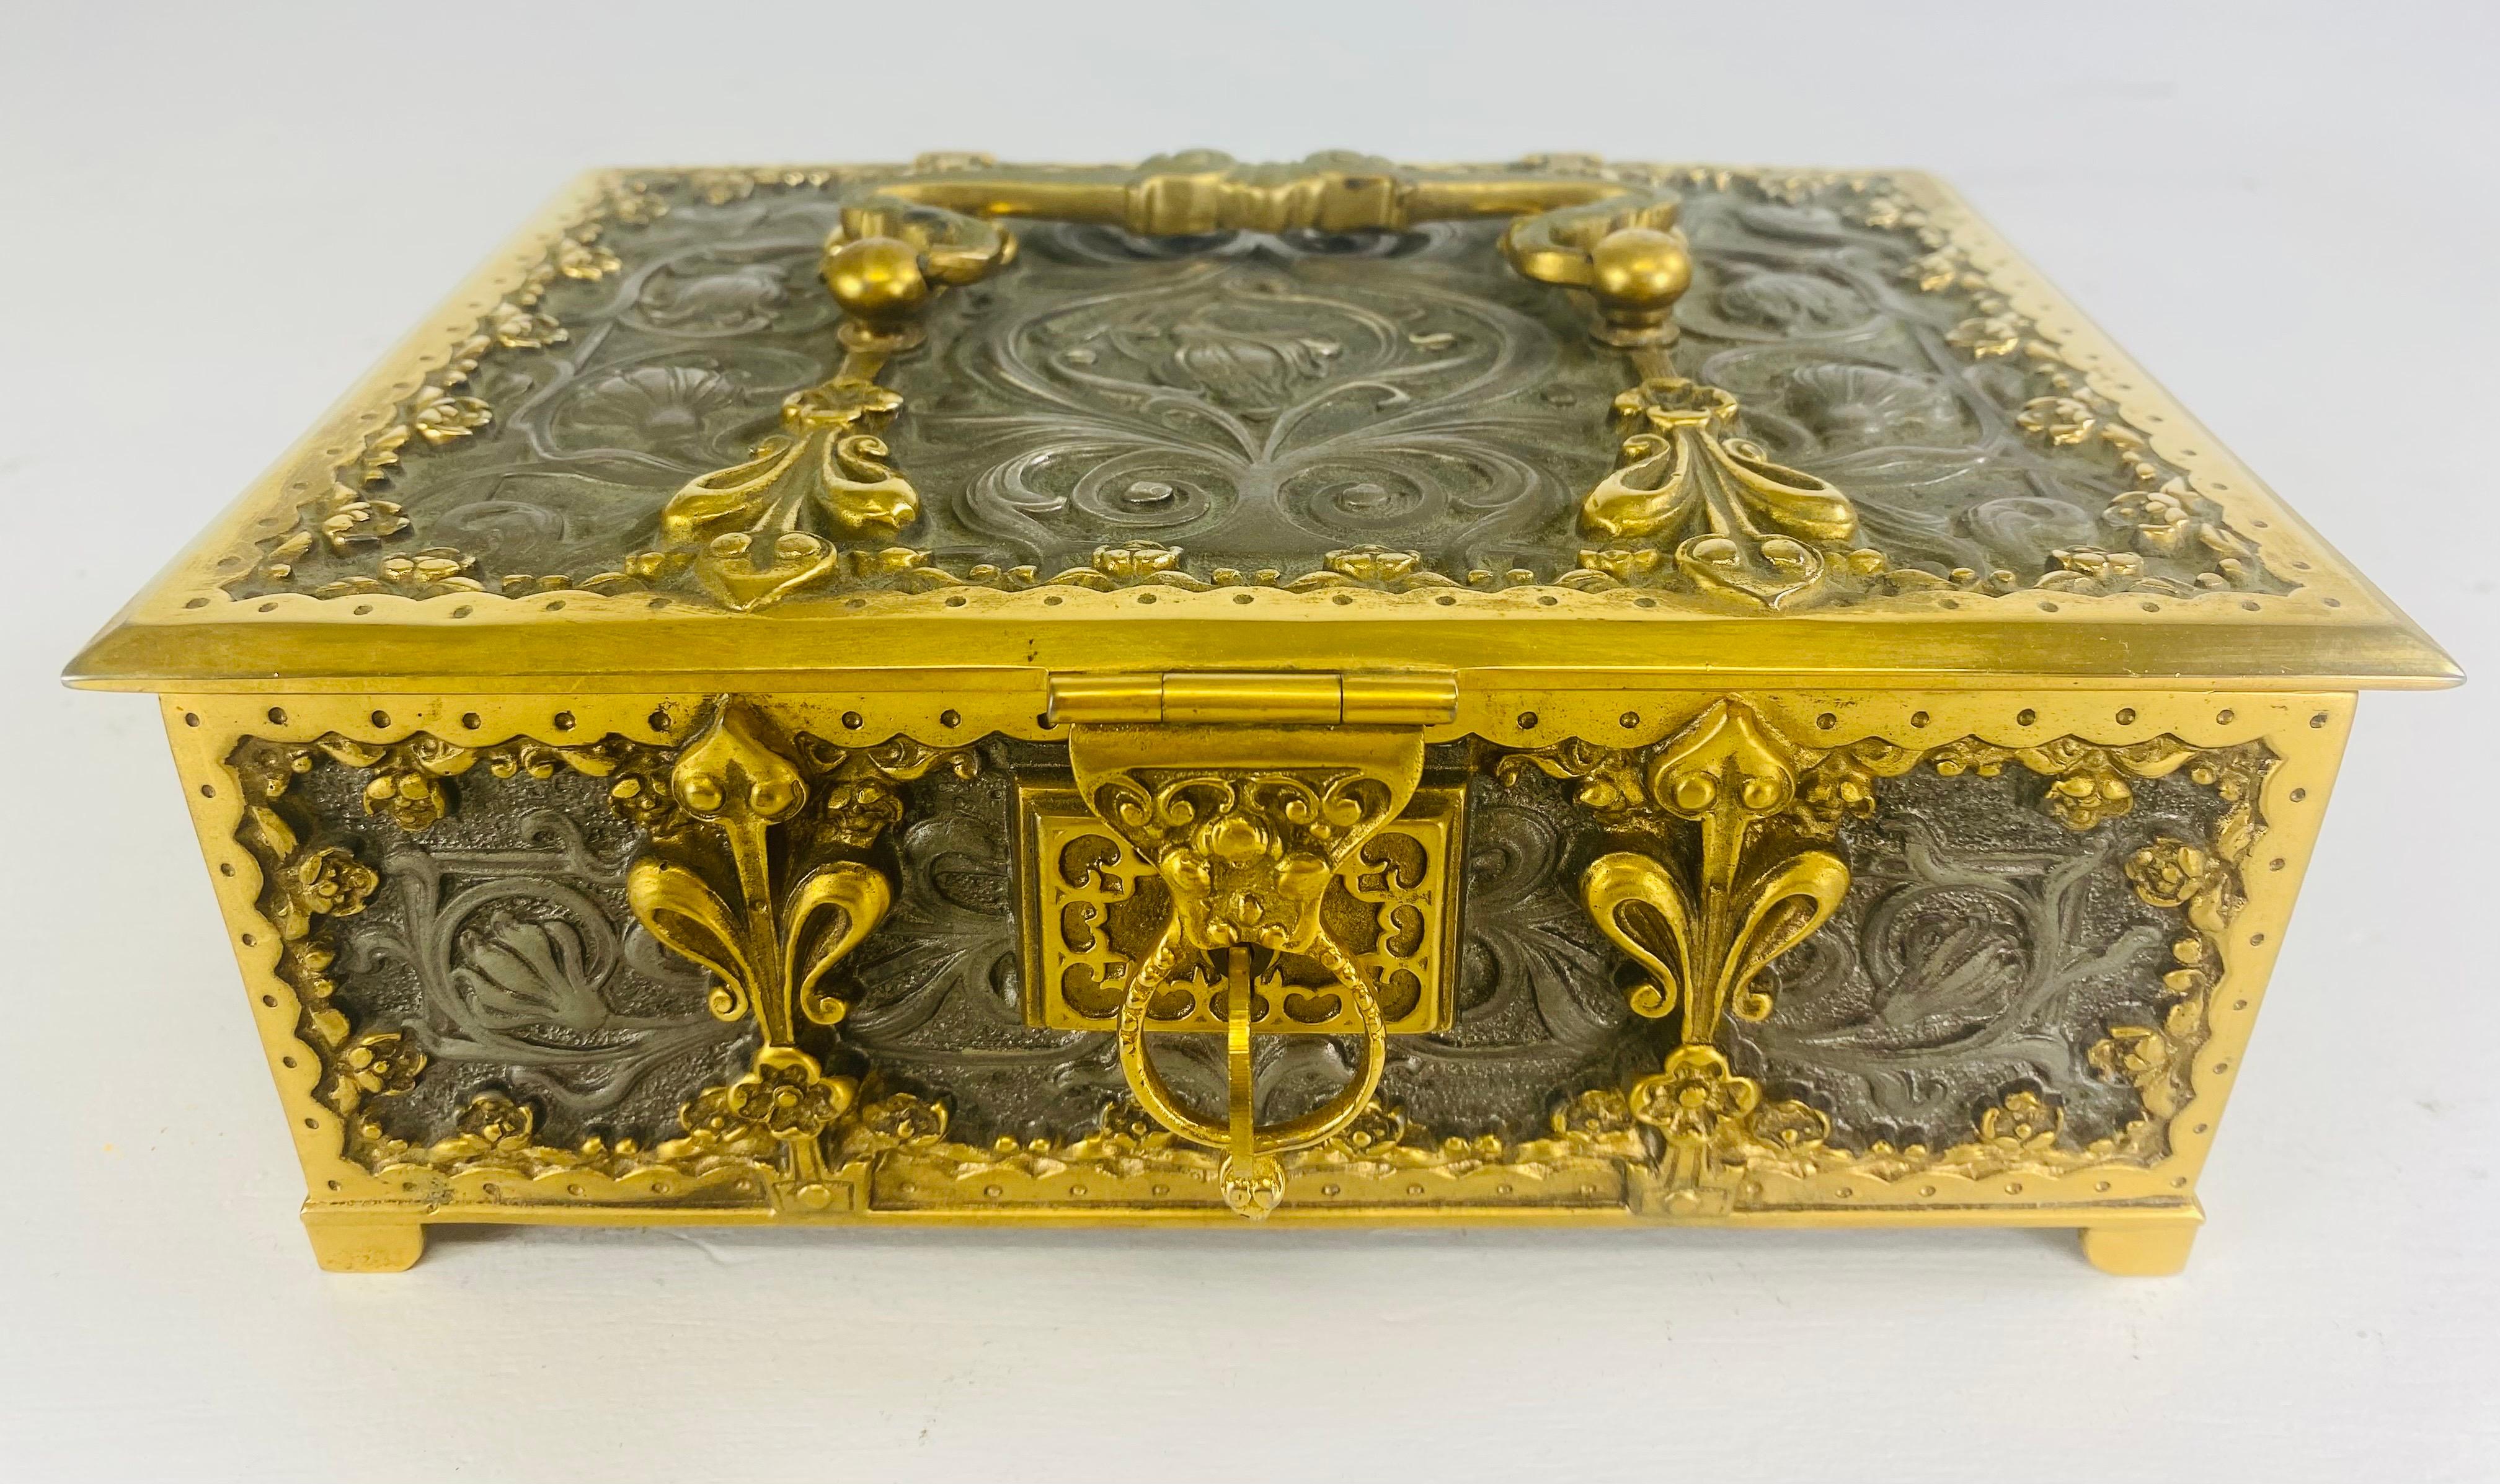 Mid 20th century German art Nevo style polished steel and brass trinket box In Good Condition For Sale In Allentown, PA